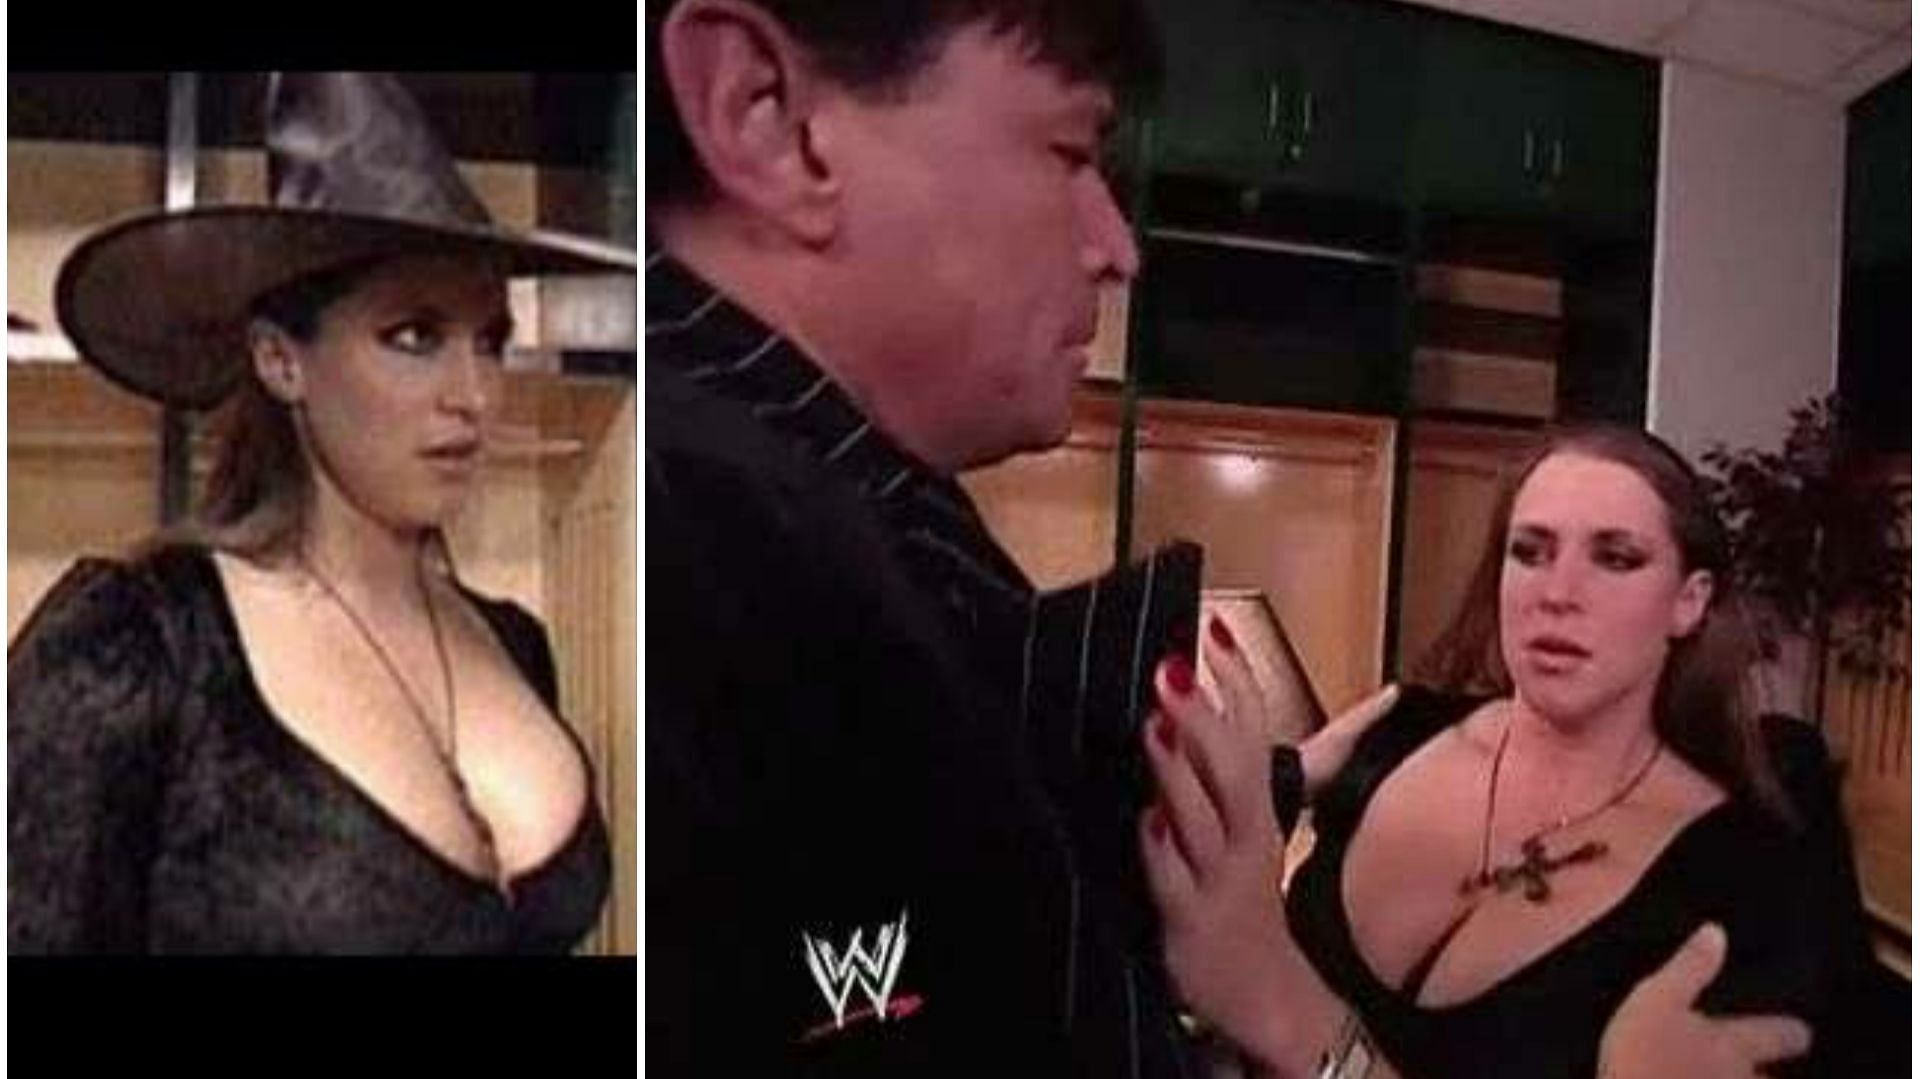 Why did Stephanie McMahon kiss Eric Bischoff?